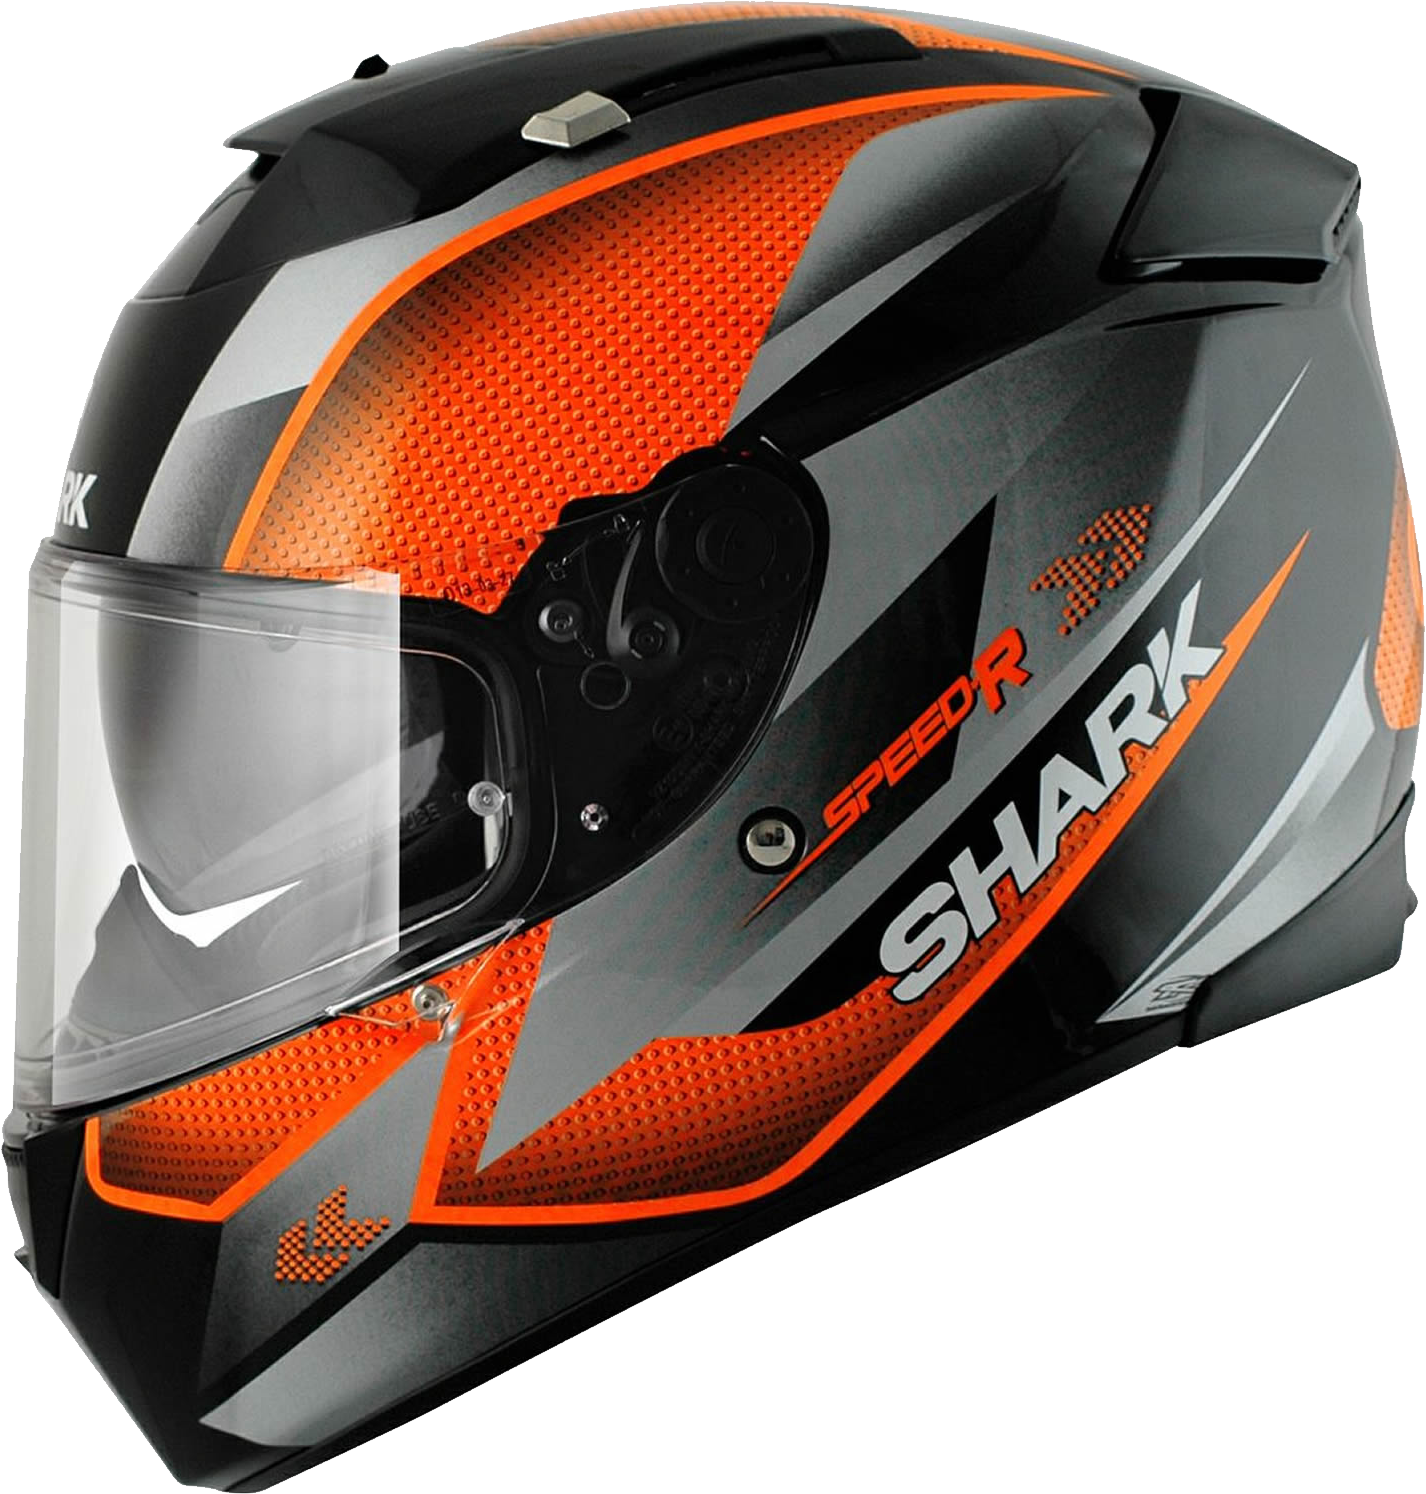 Motorcycle helmets PNG images Download 